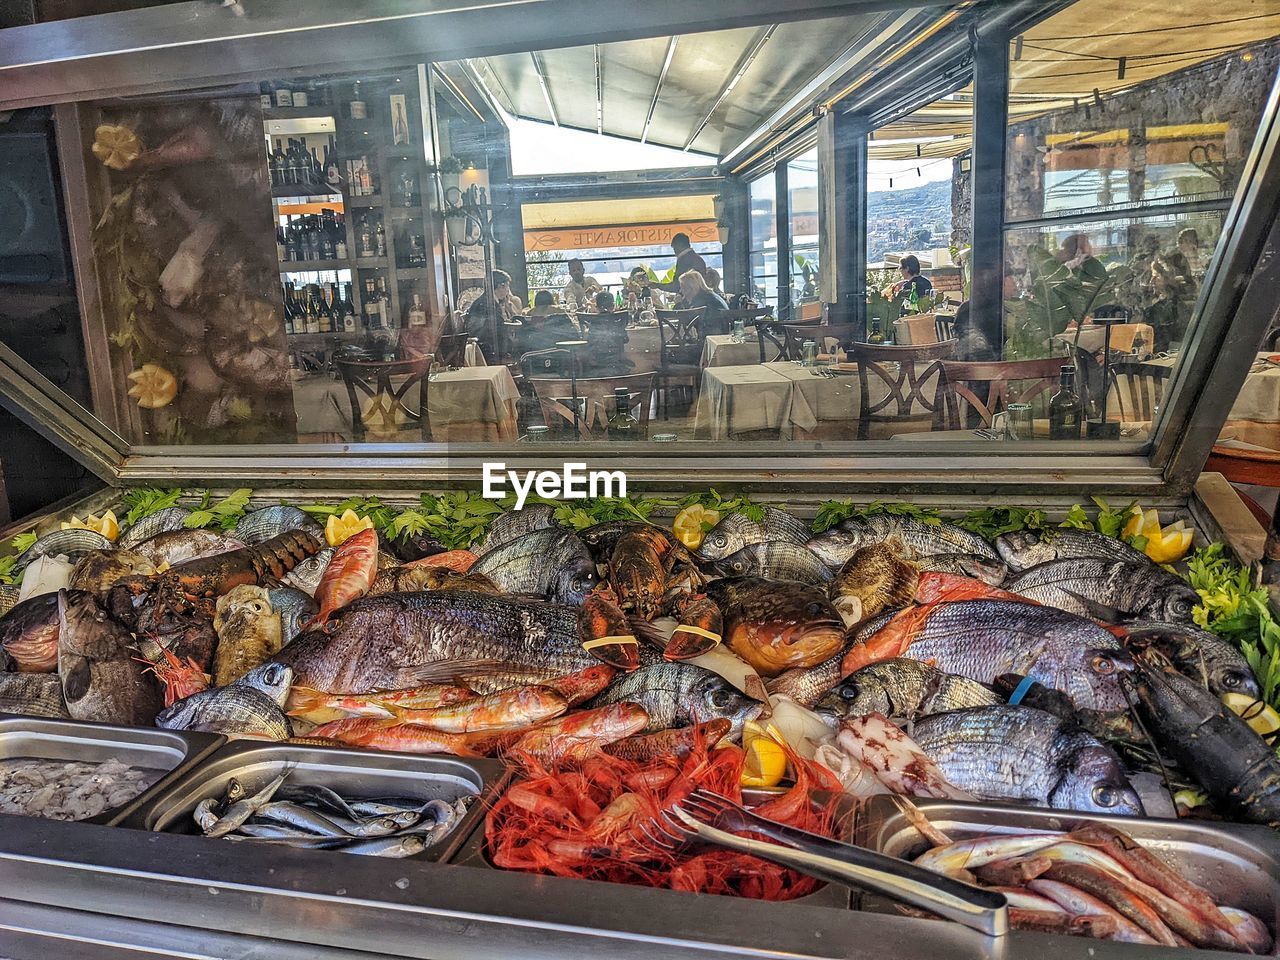 food, food and drink, seafood, freshness, abundance, indoors, retail, no people, market, large group of objects, dish, animal, day, meal, meat, crustacean, healthy eating, variation, business, fish, business finance and industry, wellbeing